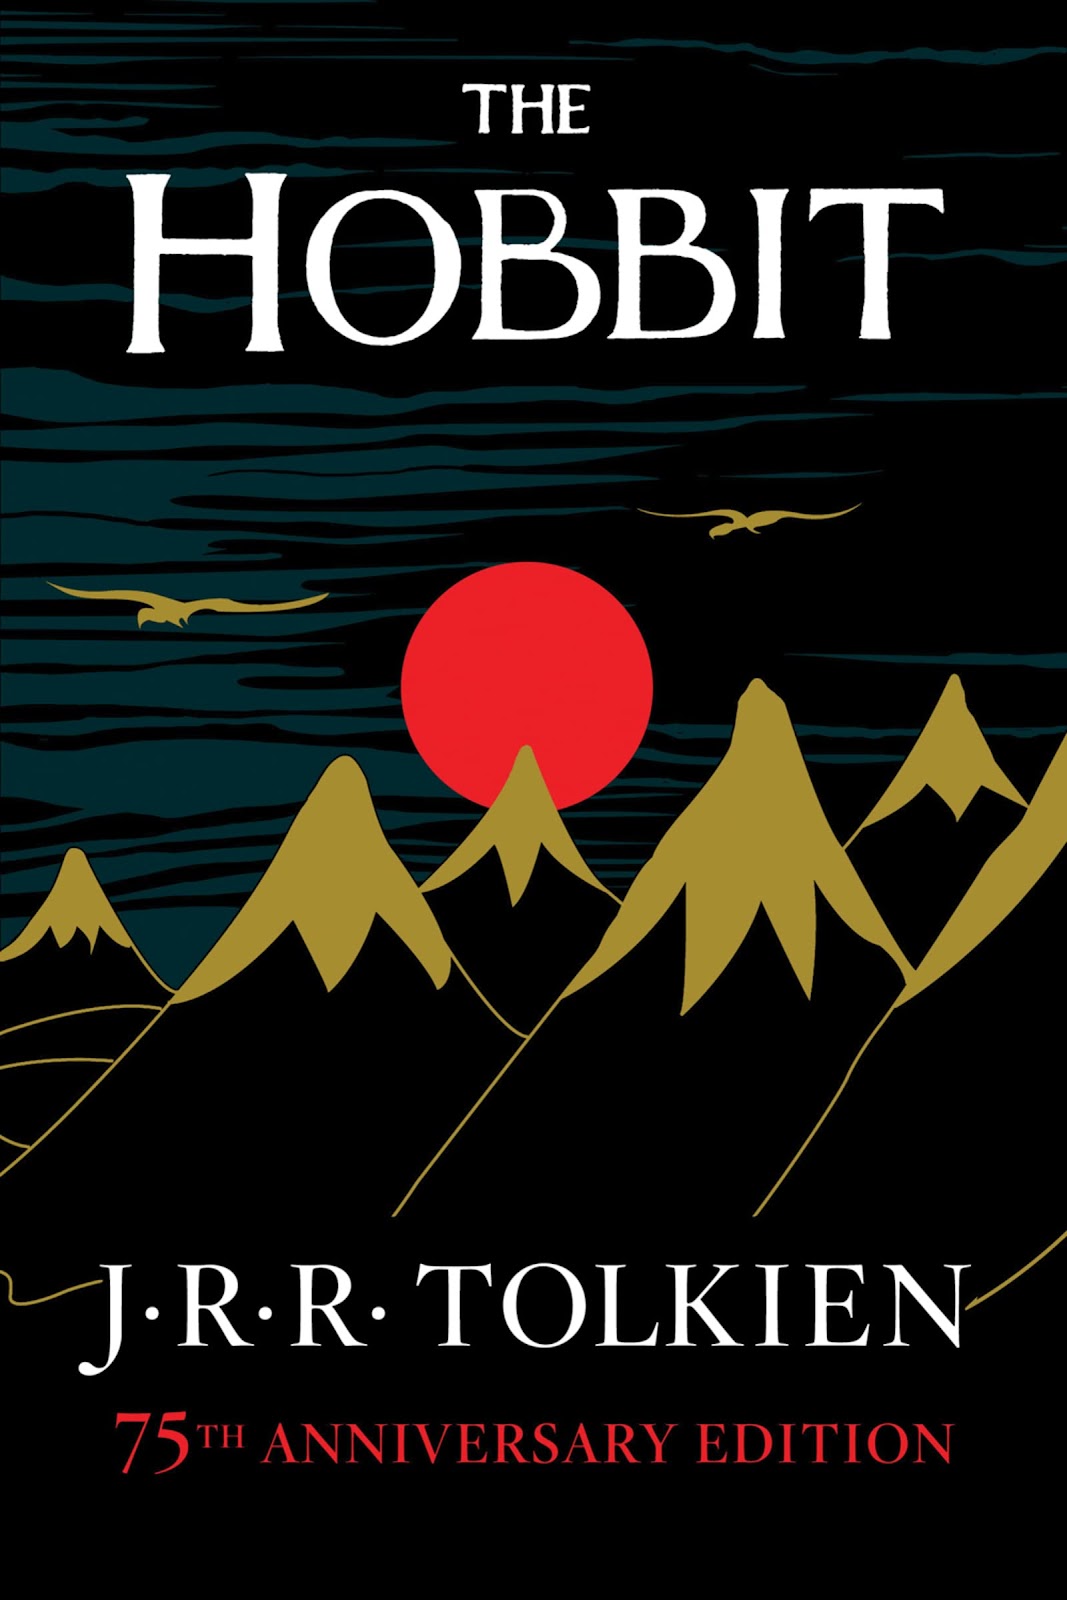 The Hobbit By J.R.R. Tolkien: Best-Selling Books